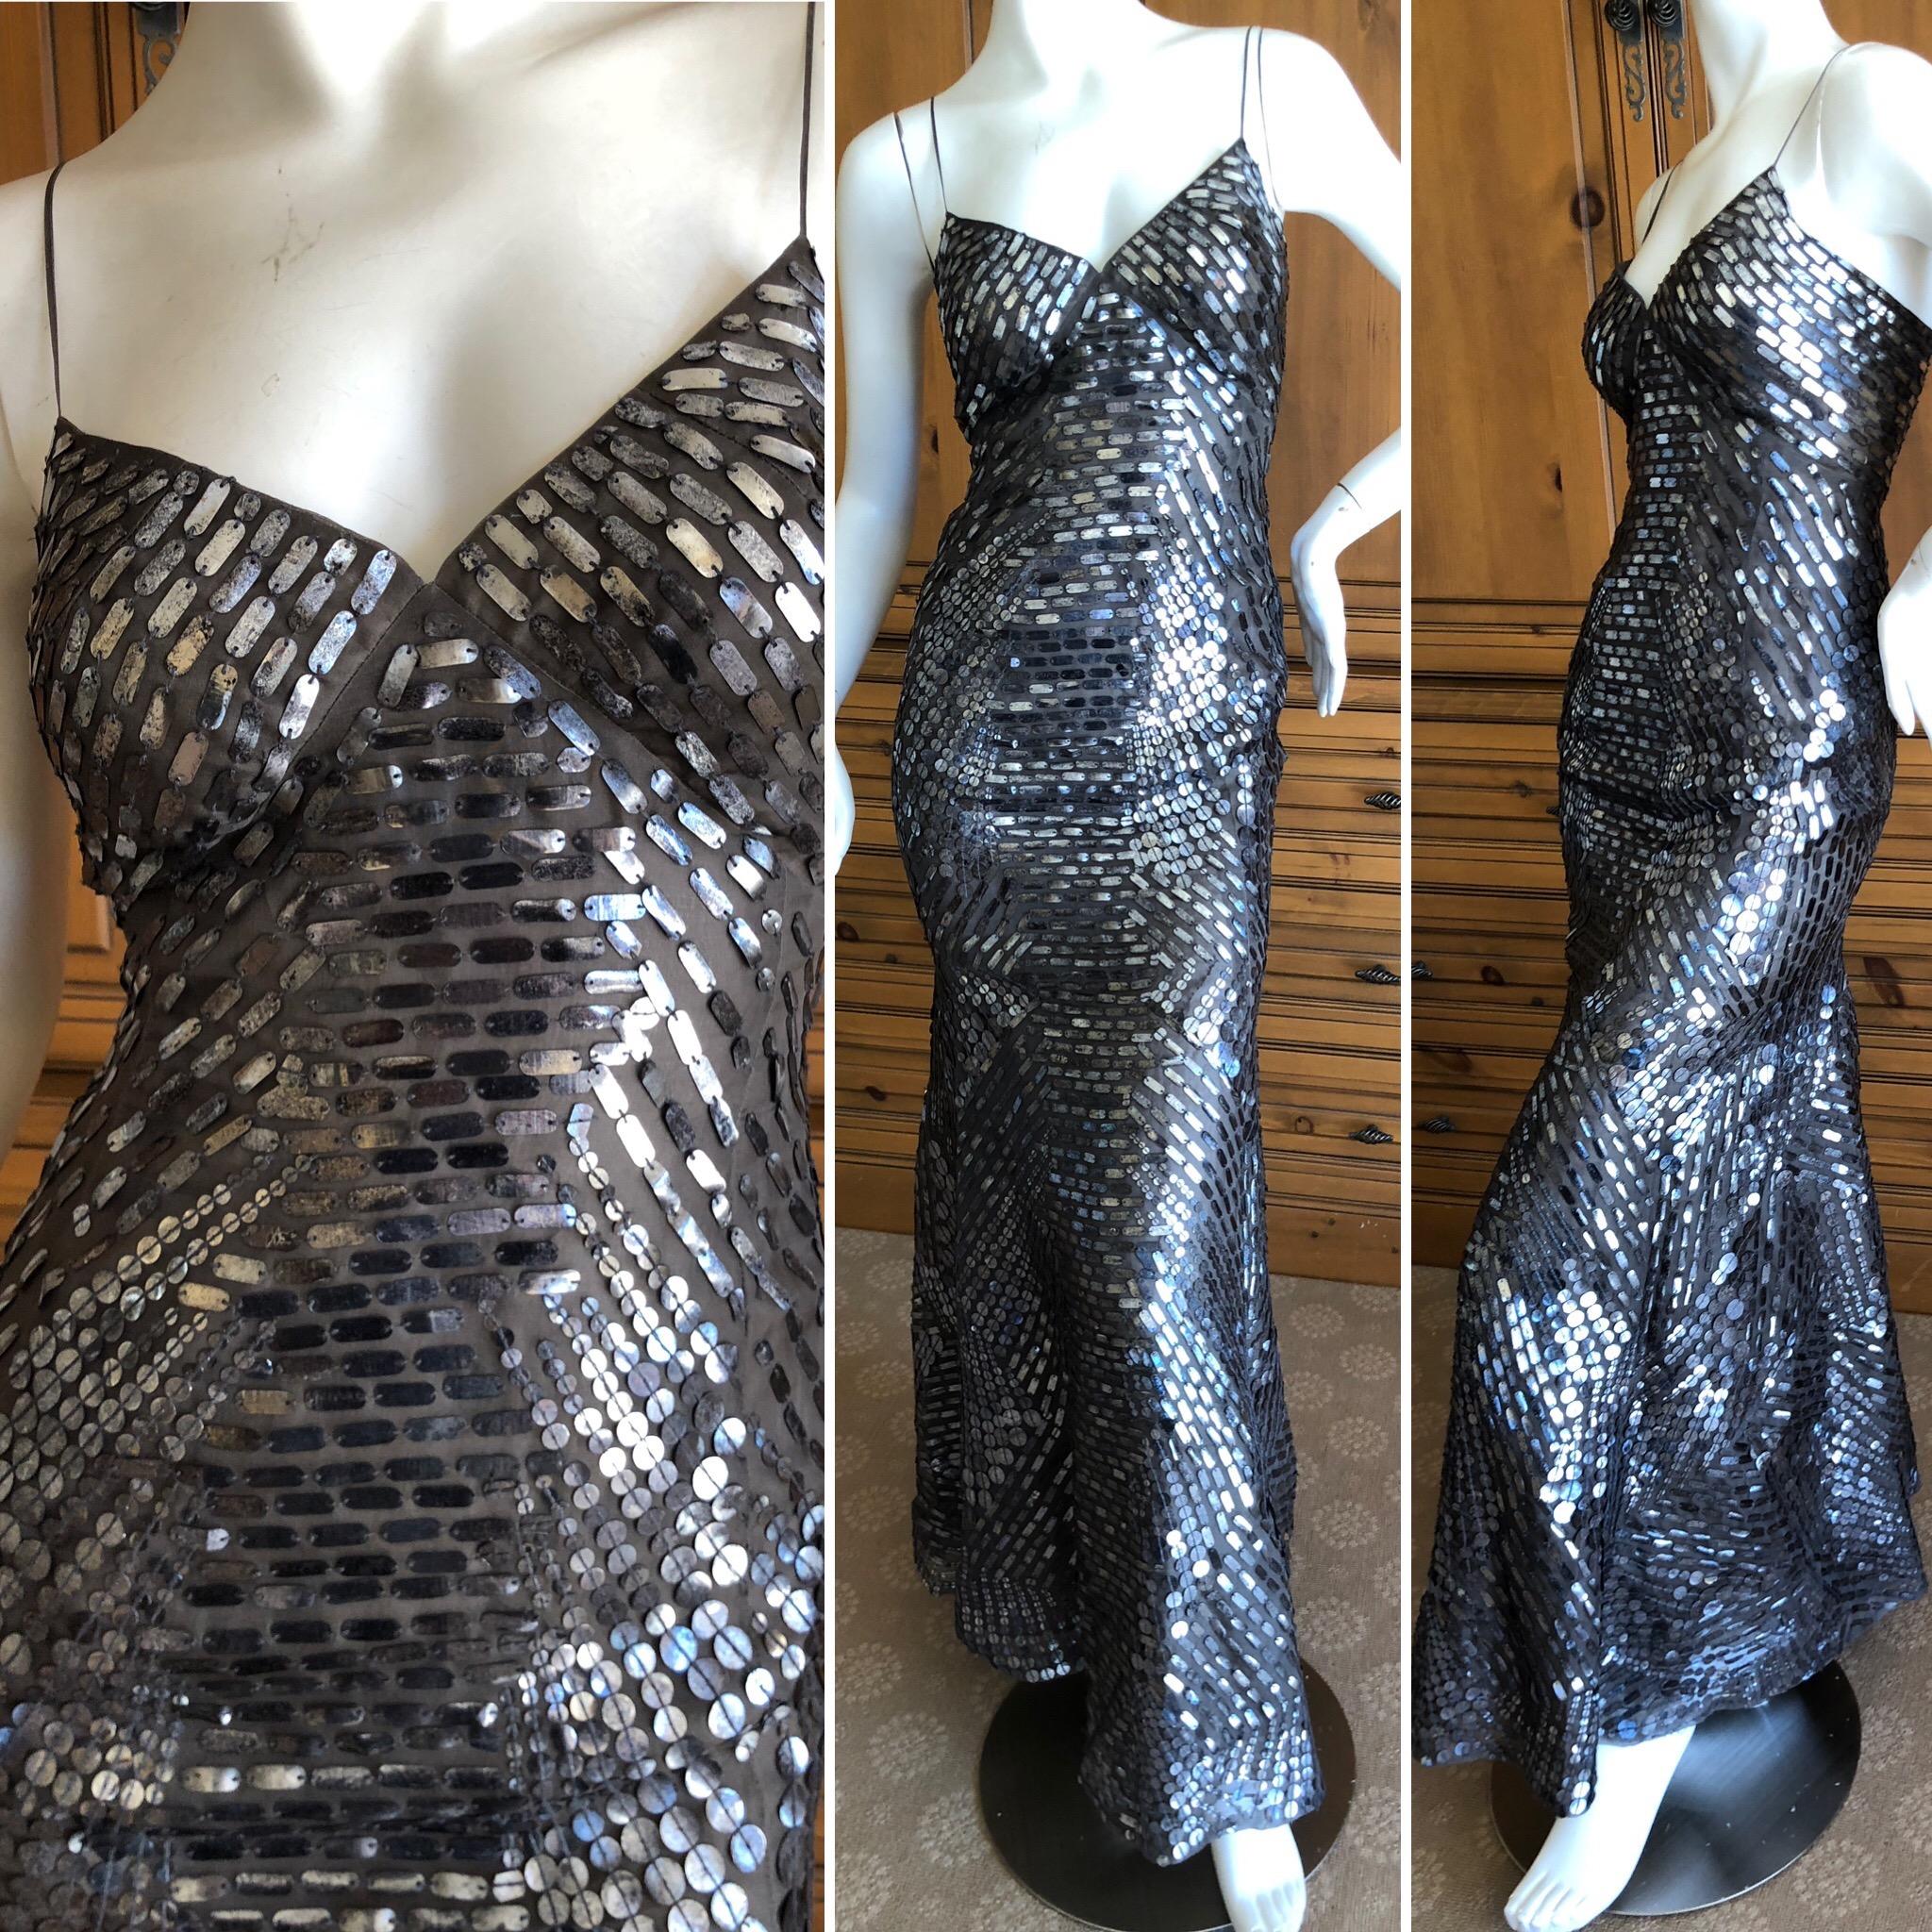 Oscar de la Renta Pewter Mosaic Pattern Sequin Mermaid Gown
This is hard to photograph, but is covered in a geometric pattern of pewter sequin that shimmers in the light.
Size 4
Bust 34